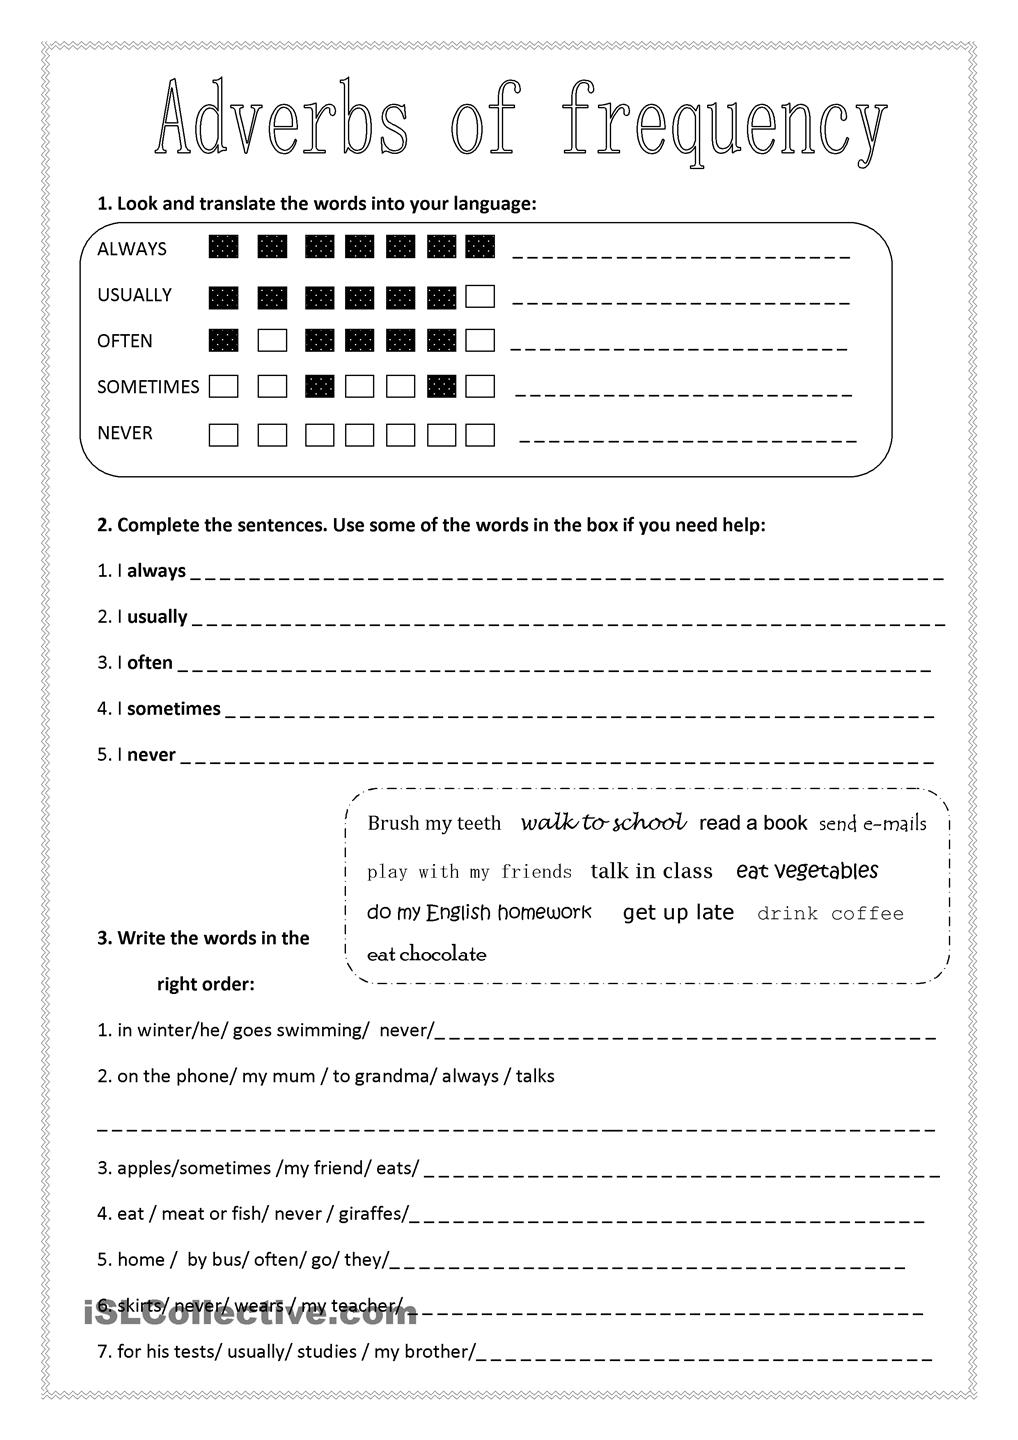 Adverbs Of Frequency Worksheet For Class 4